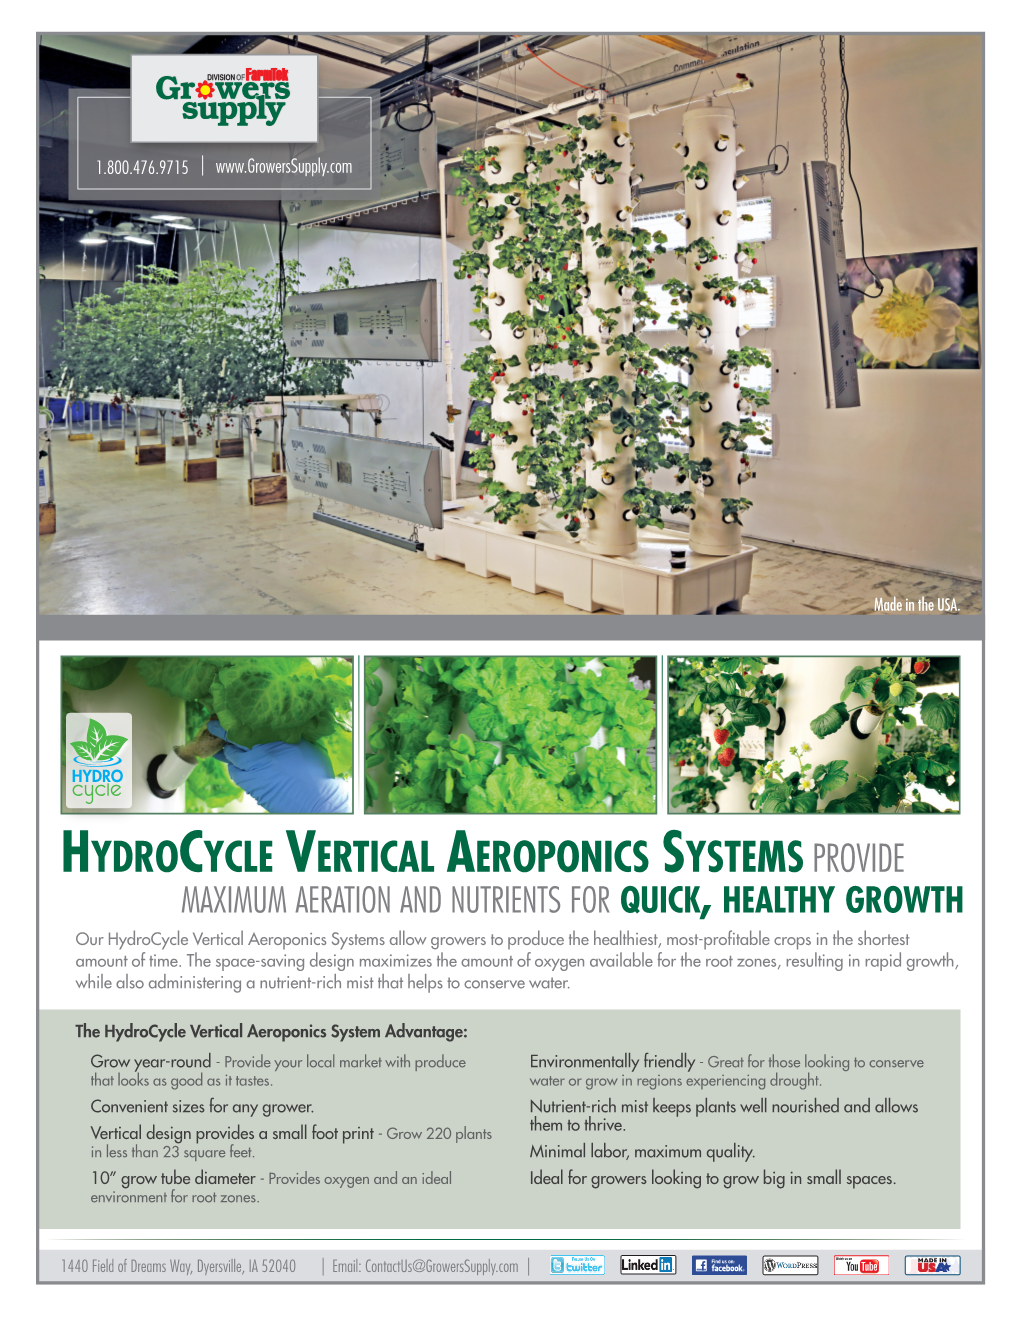 Hydrocycle Vertical Aeroponics Systems Provide